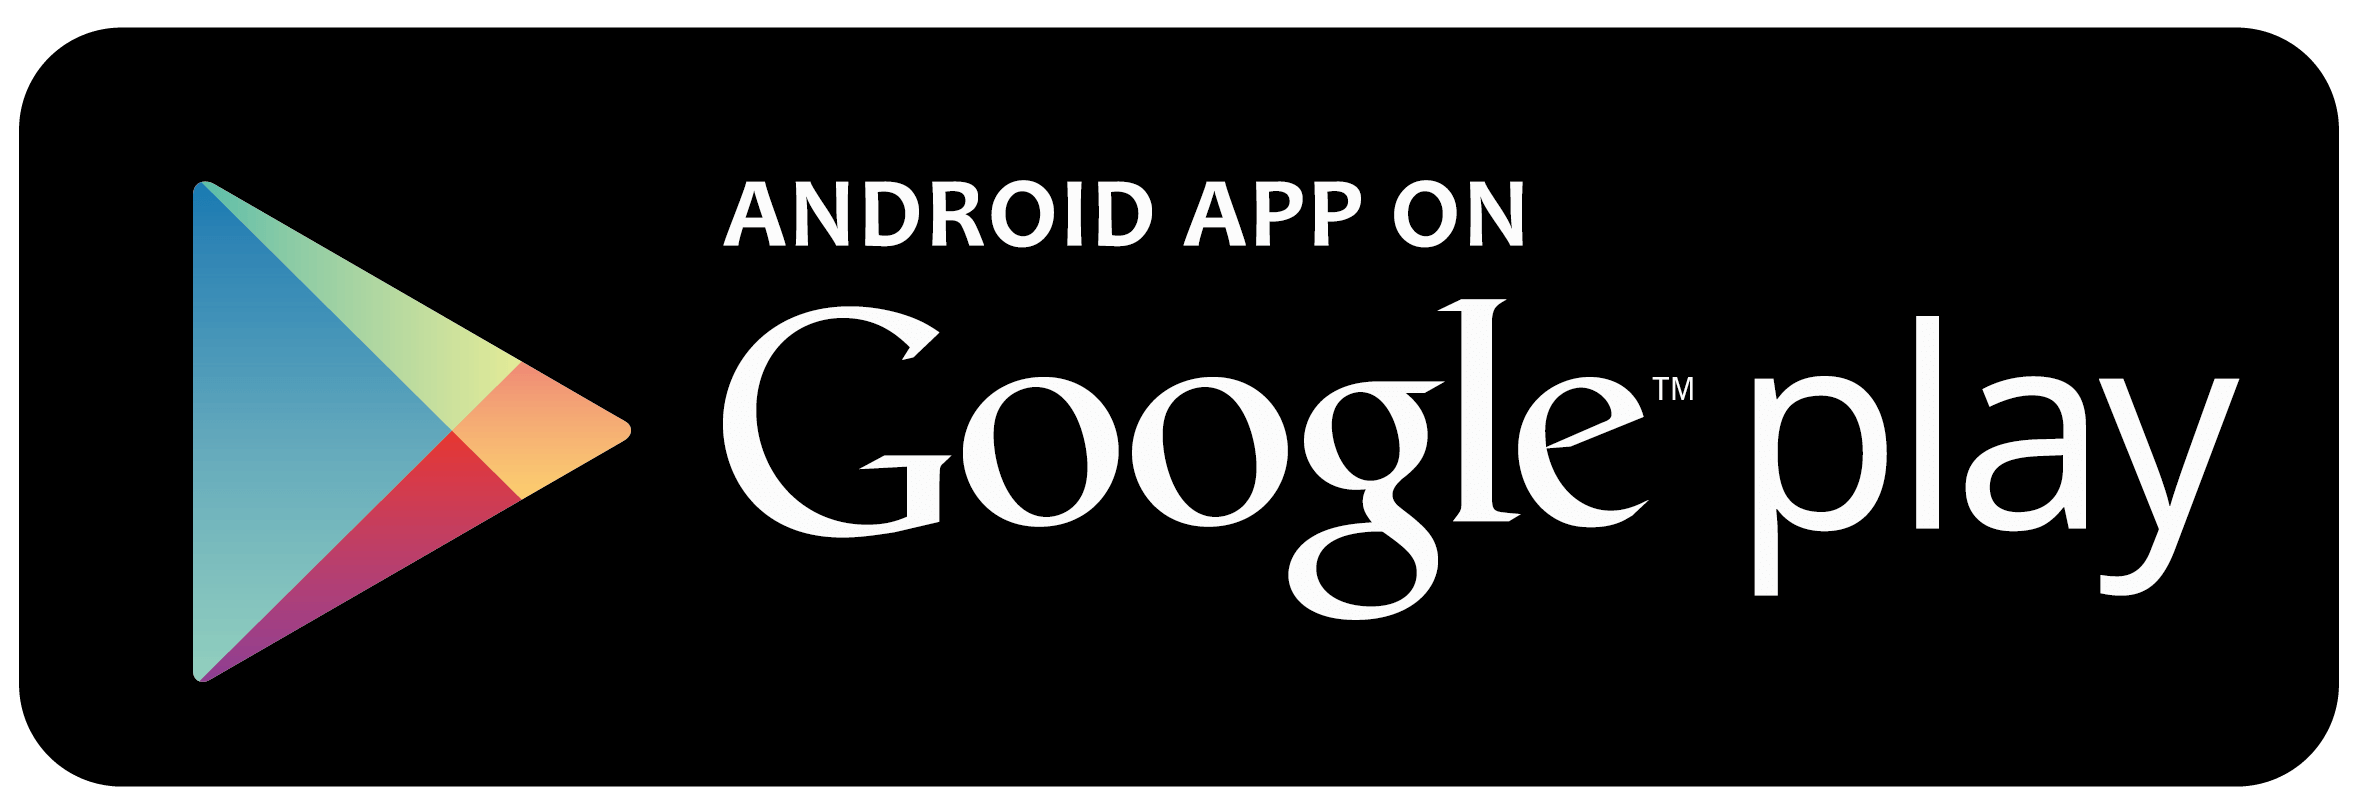 On Google Play App Andproid Logo - National MI's Mobile Apps | National MI